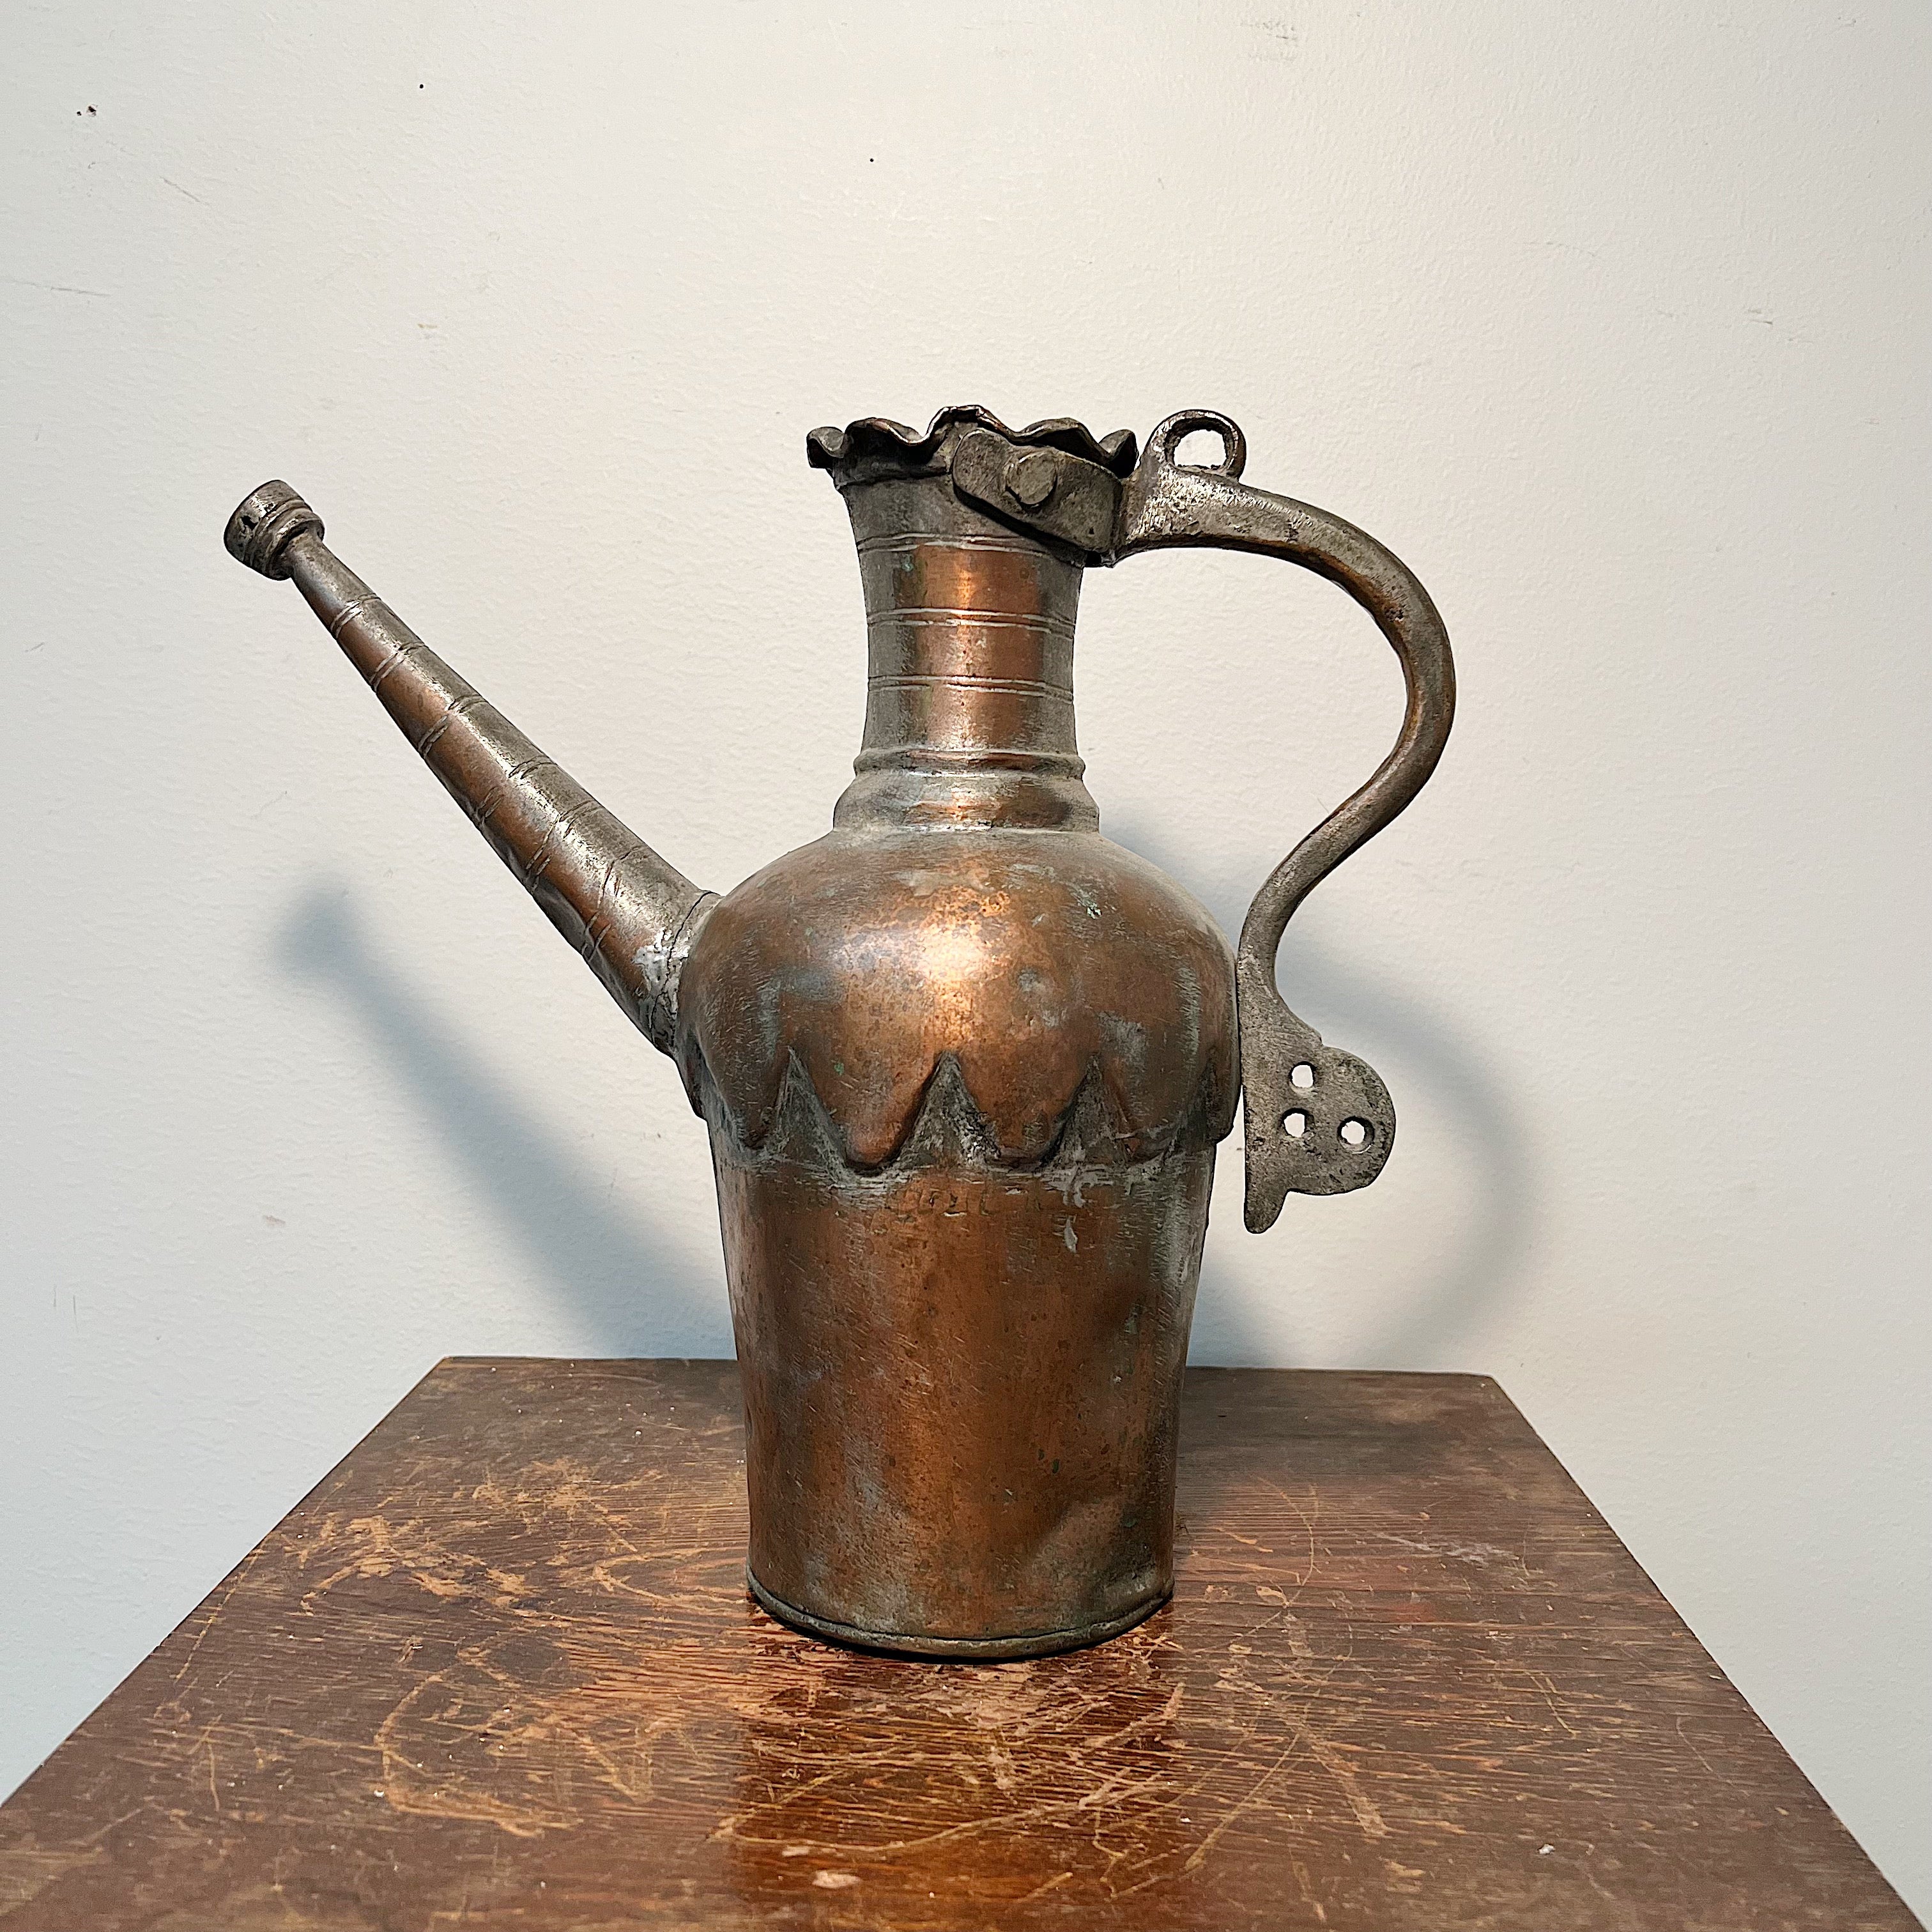 Early Copper Pitcher Pot with Thick Dovetailed - 1700s? - Handmade Antique Wrought Iron Metalware - Rare Rustic Decor - Articulating Handle Rare